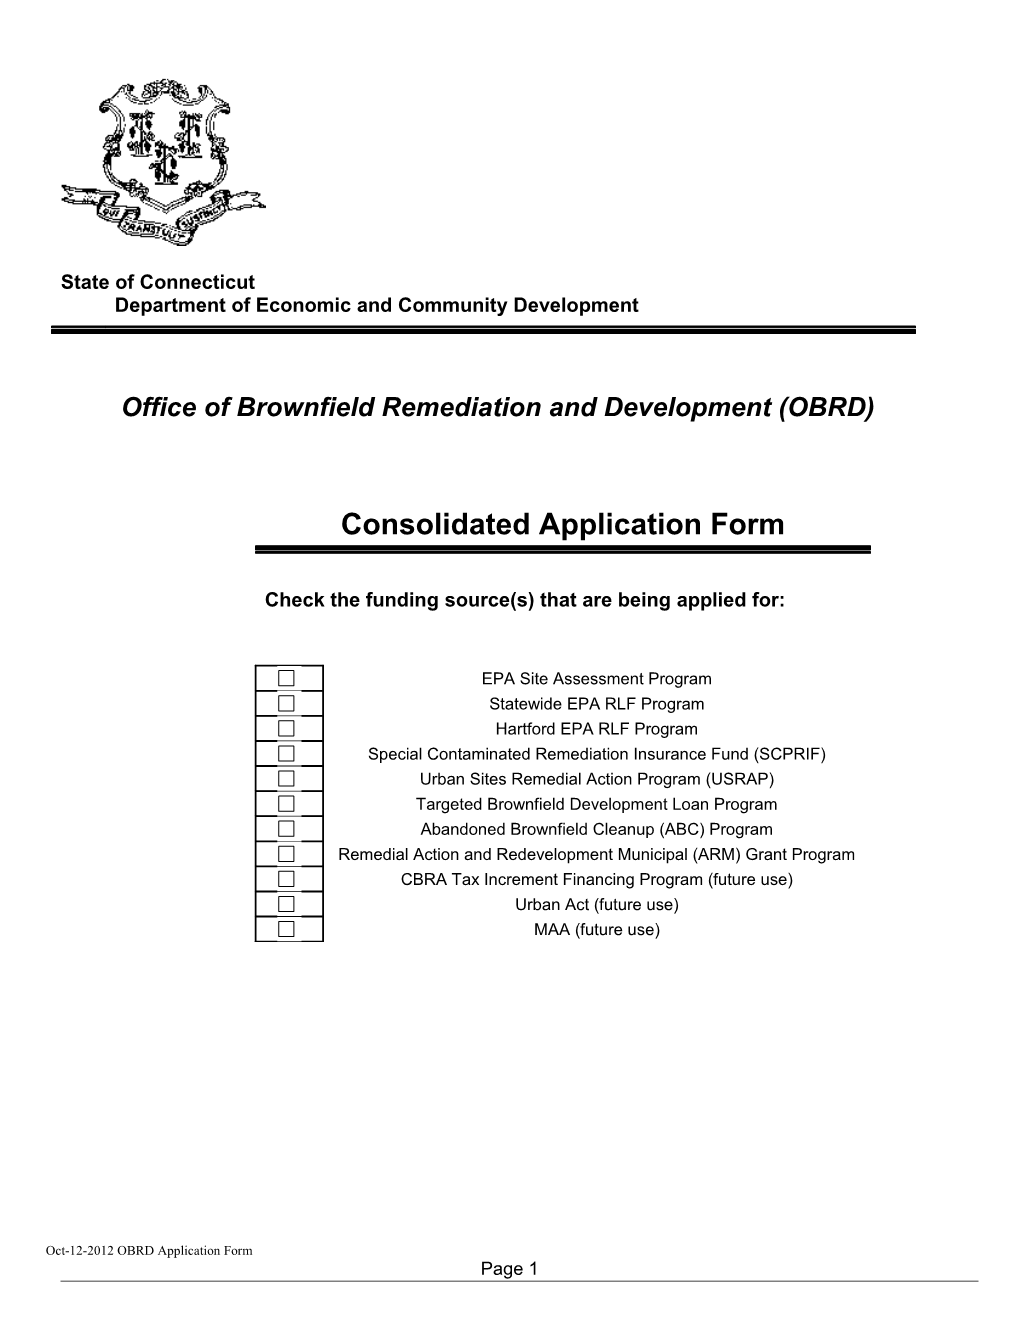 Office of Brownfield Remediation and Development (OBRD)